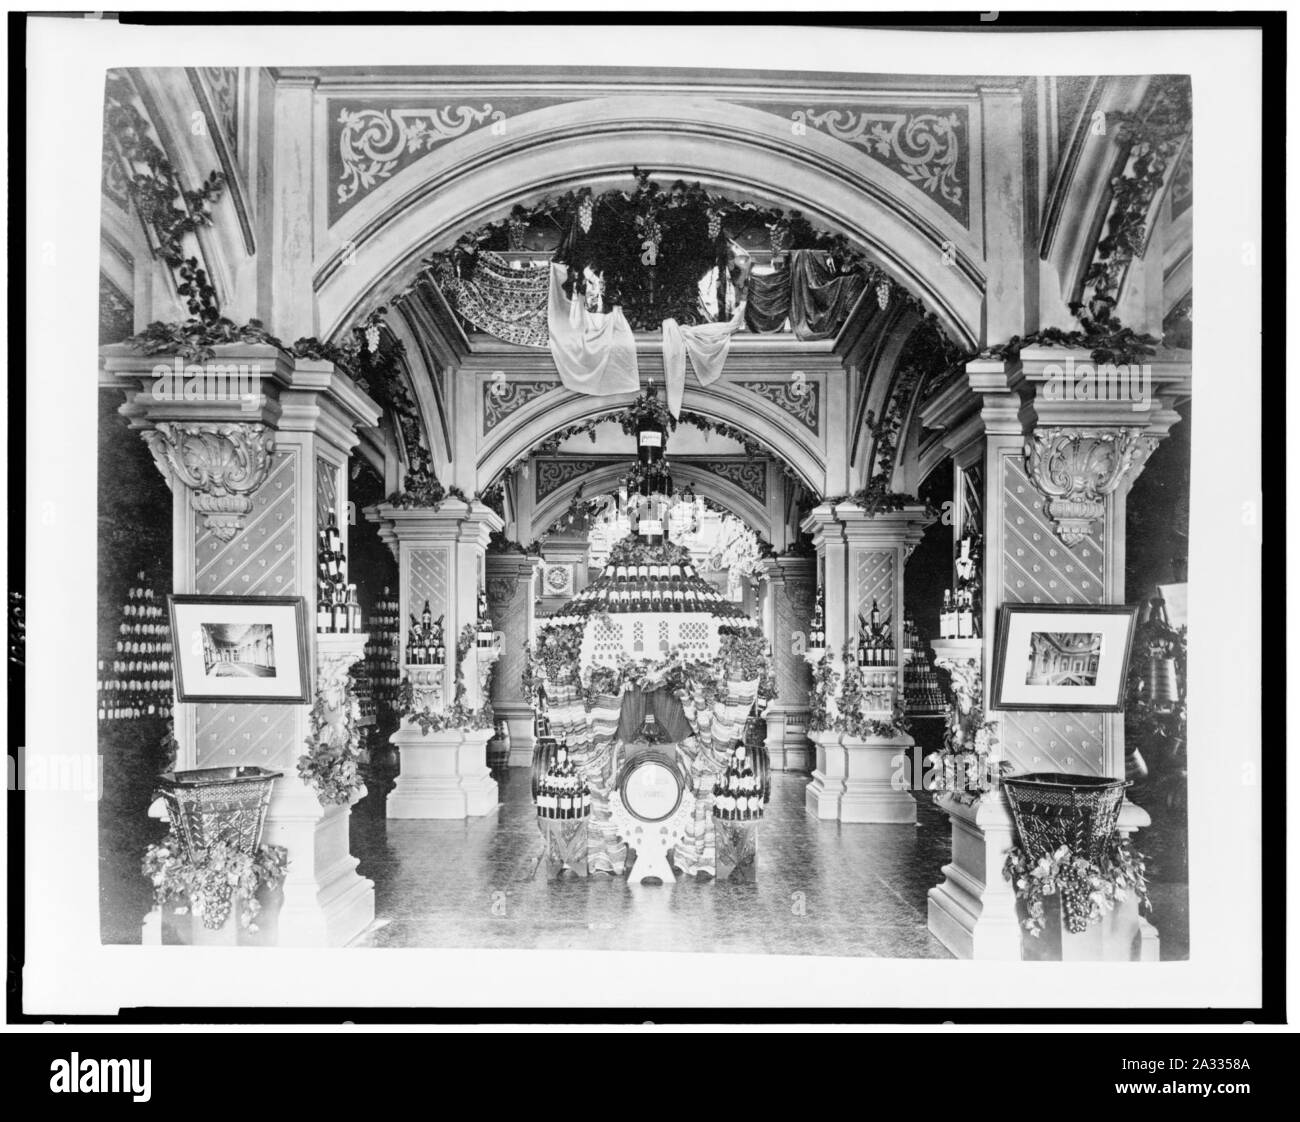 Exhibit of port wine, possibly in the Pavilion of Portugal, Paris Exposition, 1889 Stock Photo